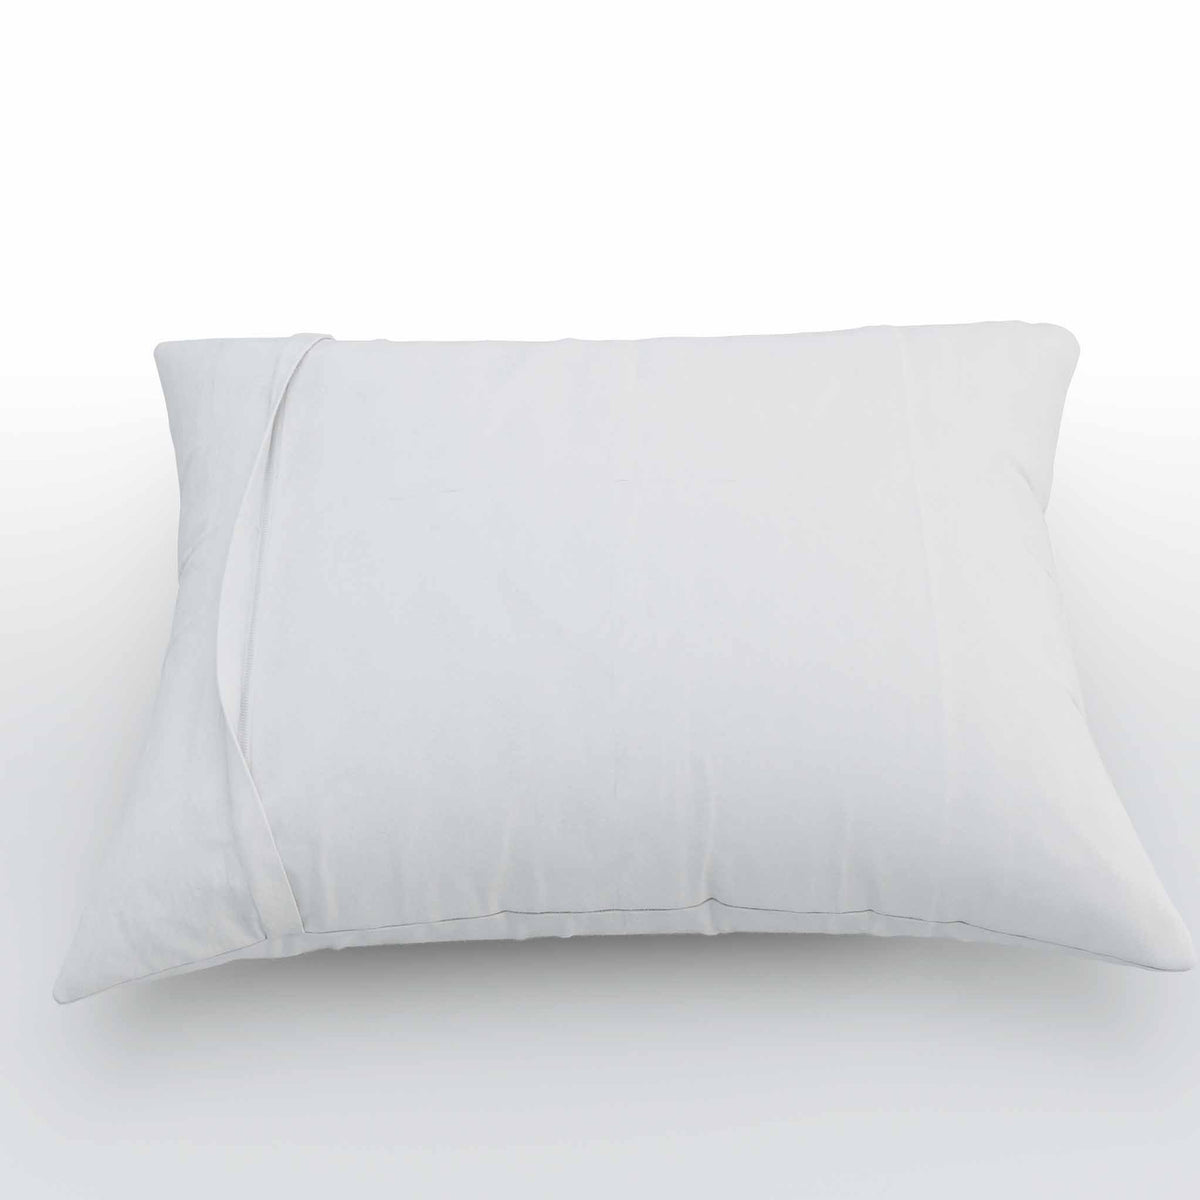 AllergyCare Cotton Pillow Covers